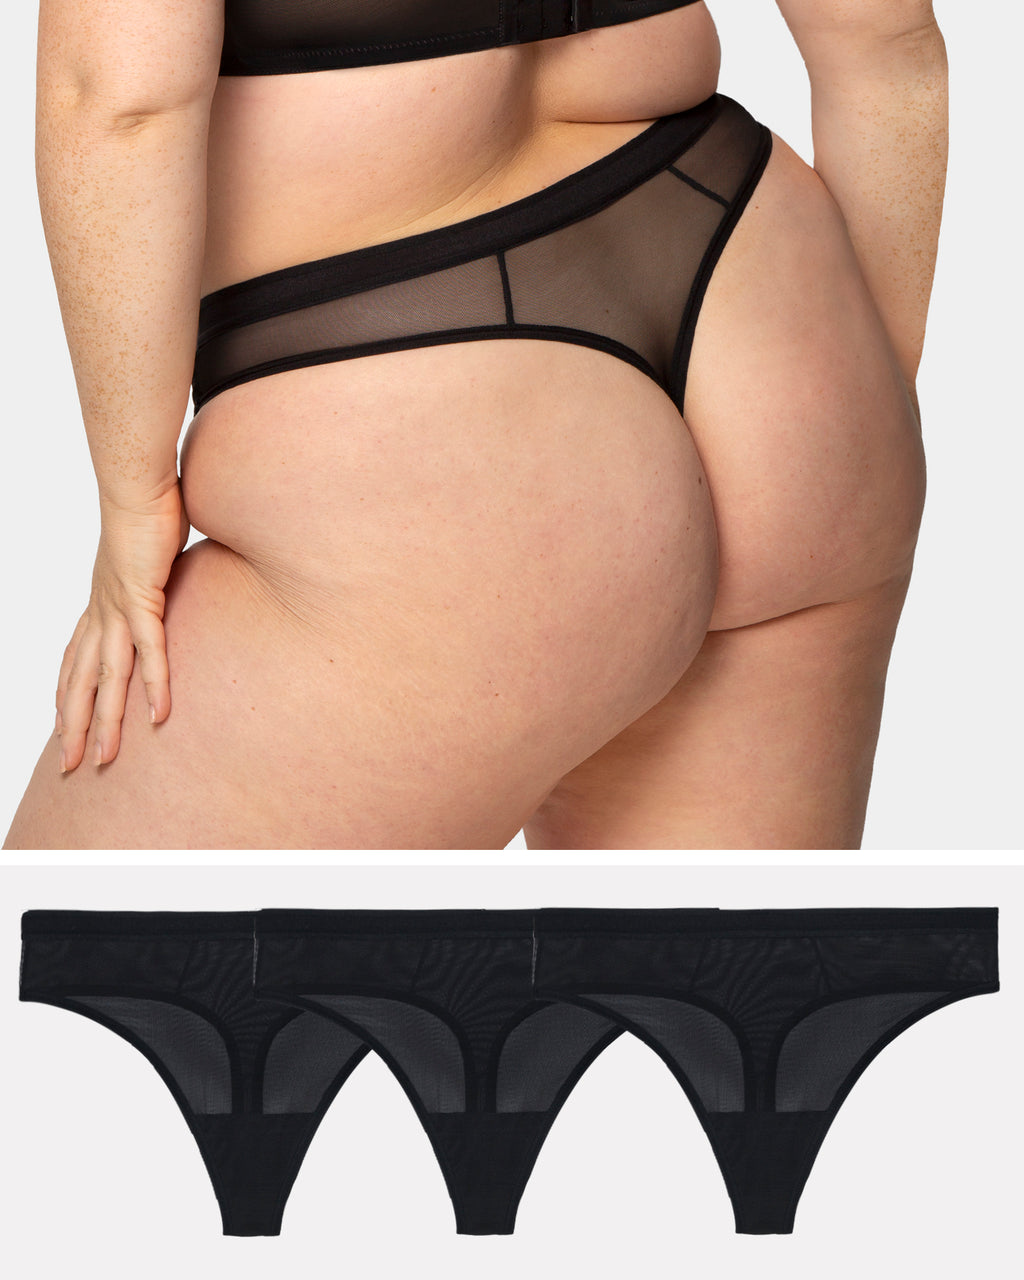 Women's Sexy 3 Pack Thongs Soft Smooth G-String Panties Stretch T